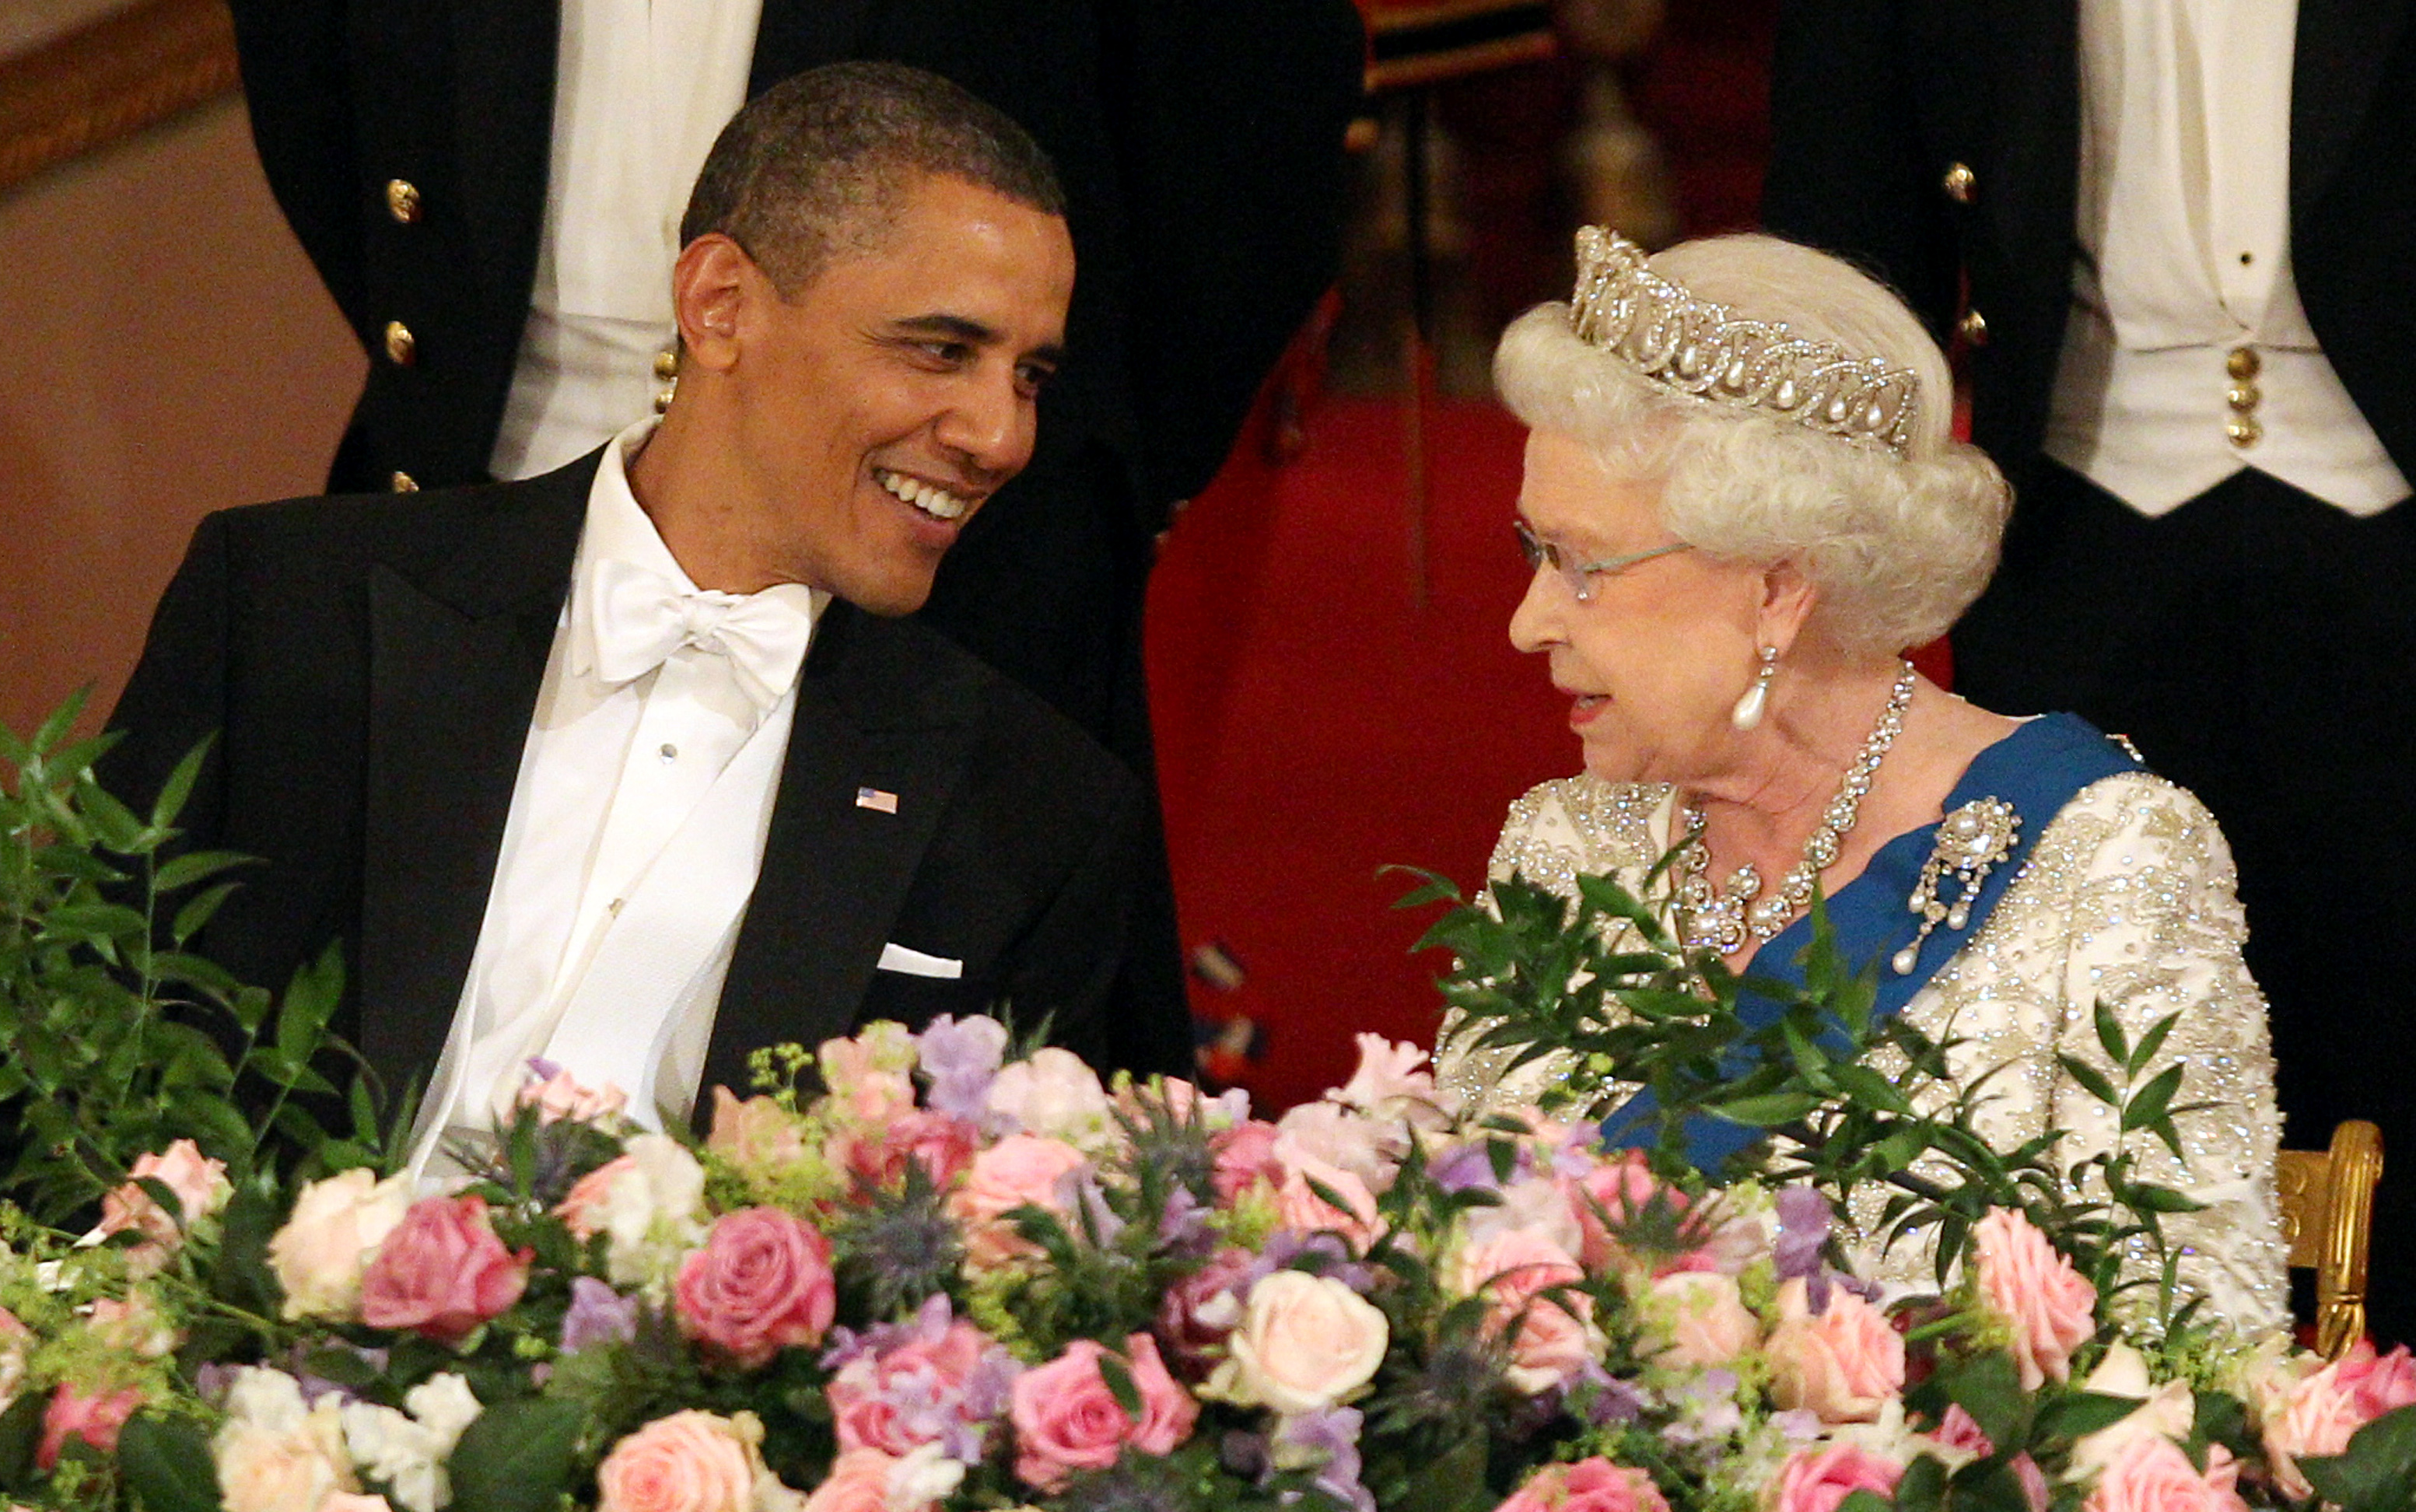 U.S. President Barack Obama and Queen Elizabeth II during a State Banquet in Buckingham Palace on May 24, 2011 in London, England. (WPA Pool/Getty Images)